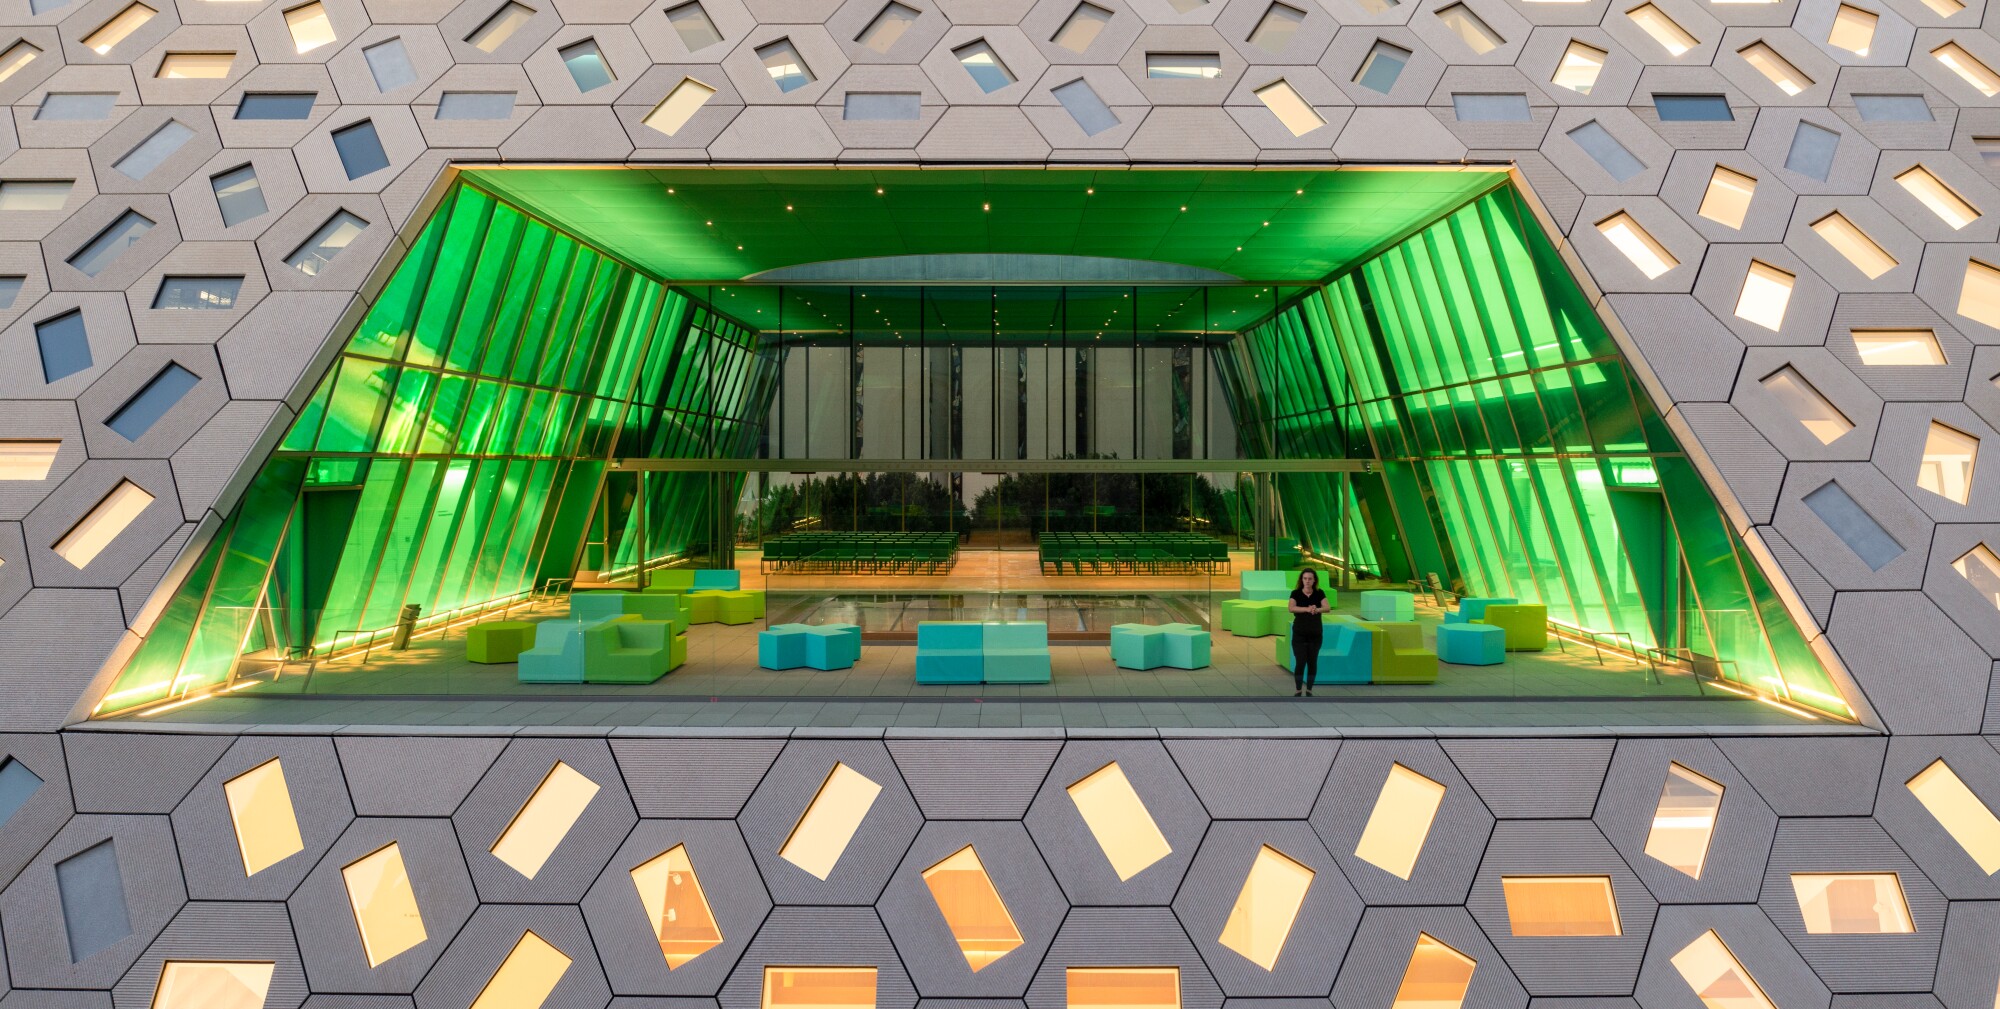 A view of an open air terrace rendered in shades of electric green and framed by a hexagonal window.